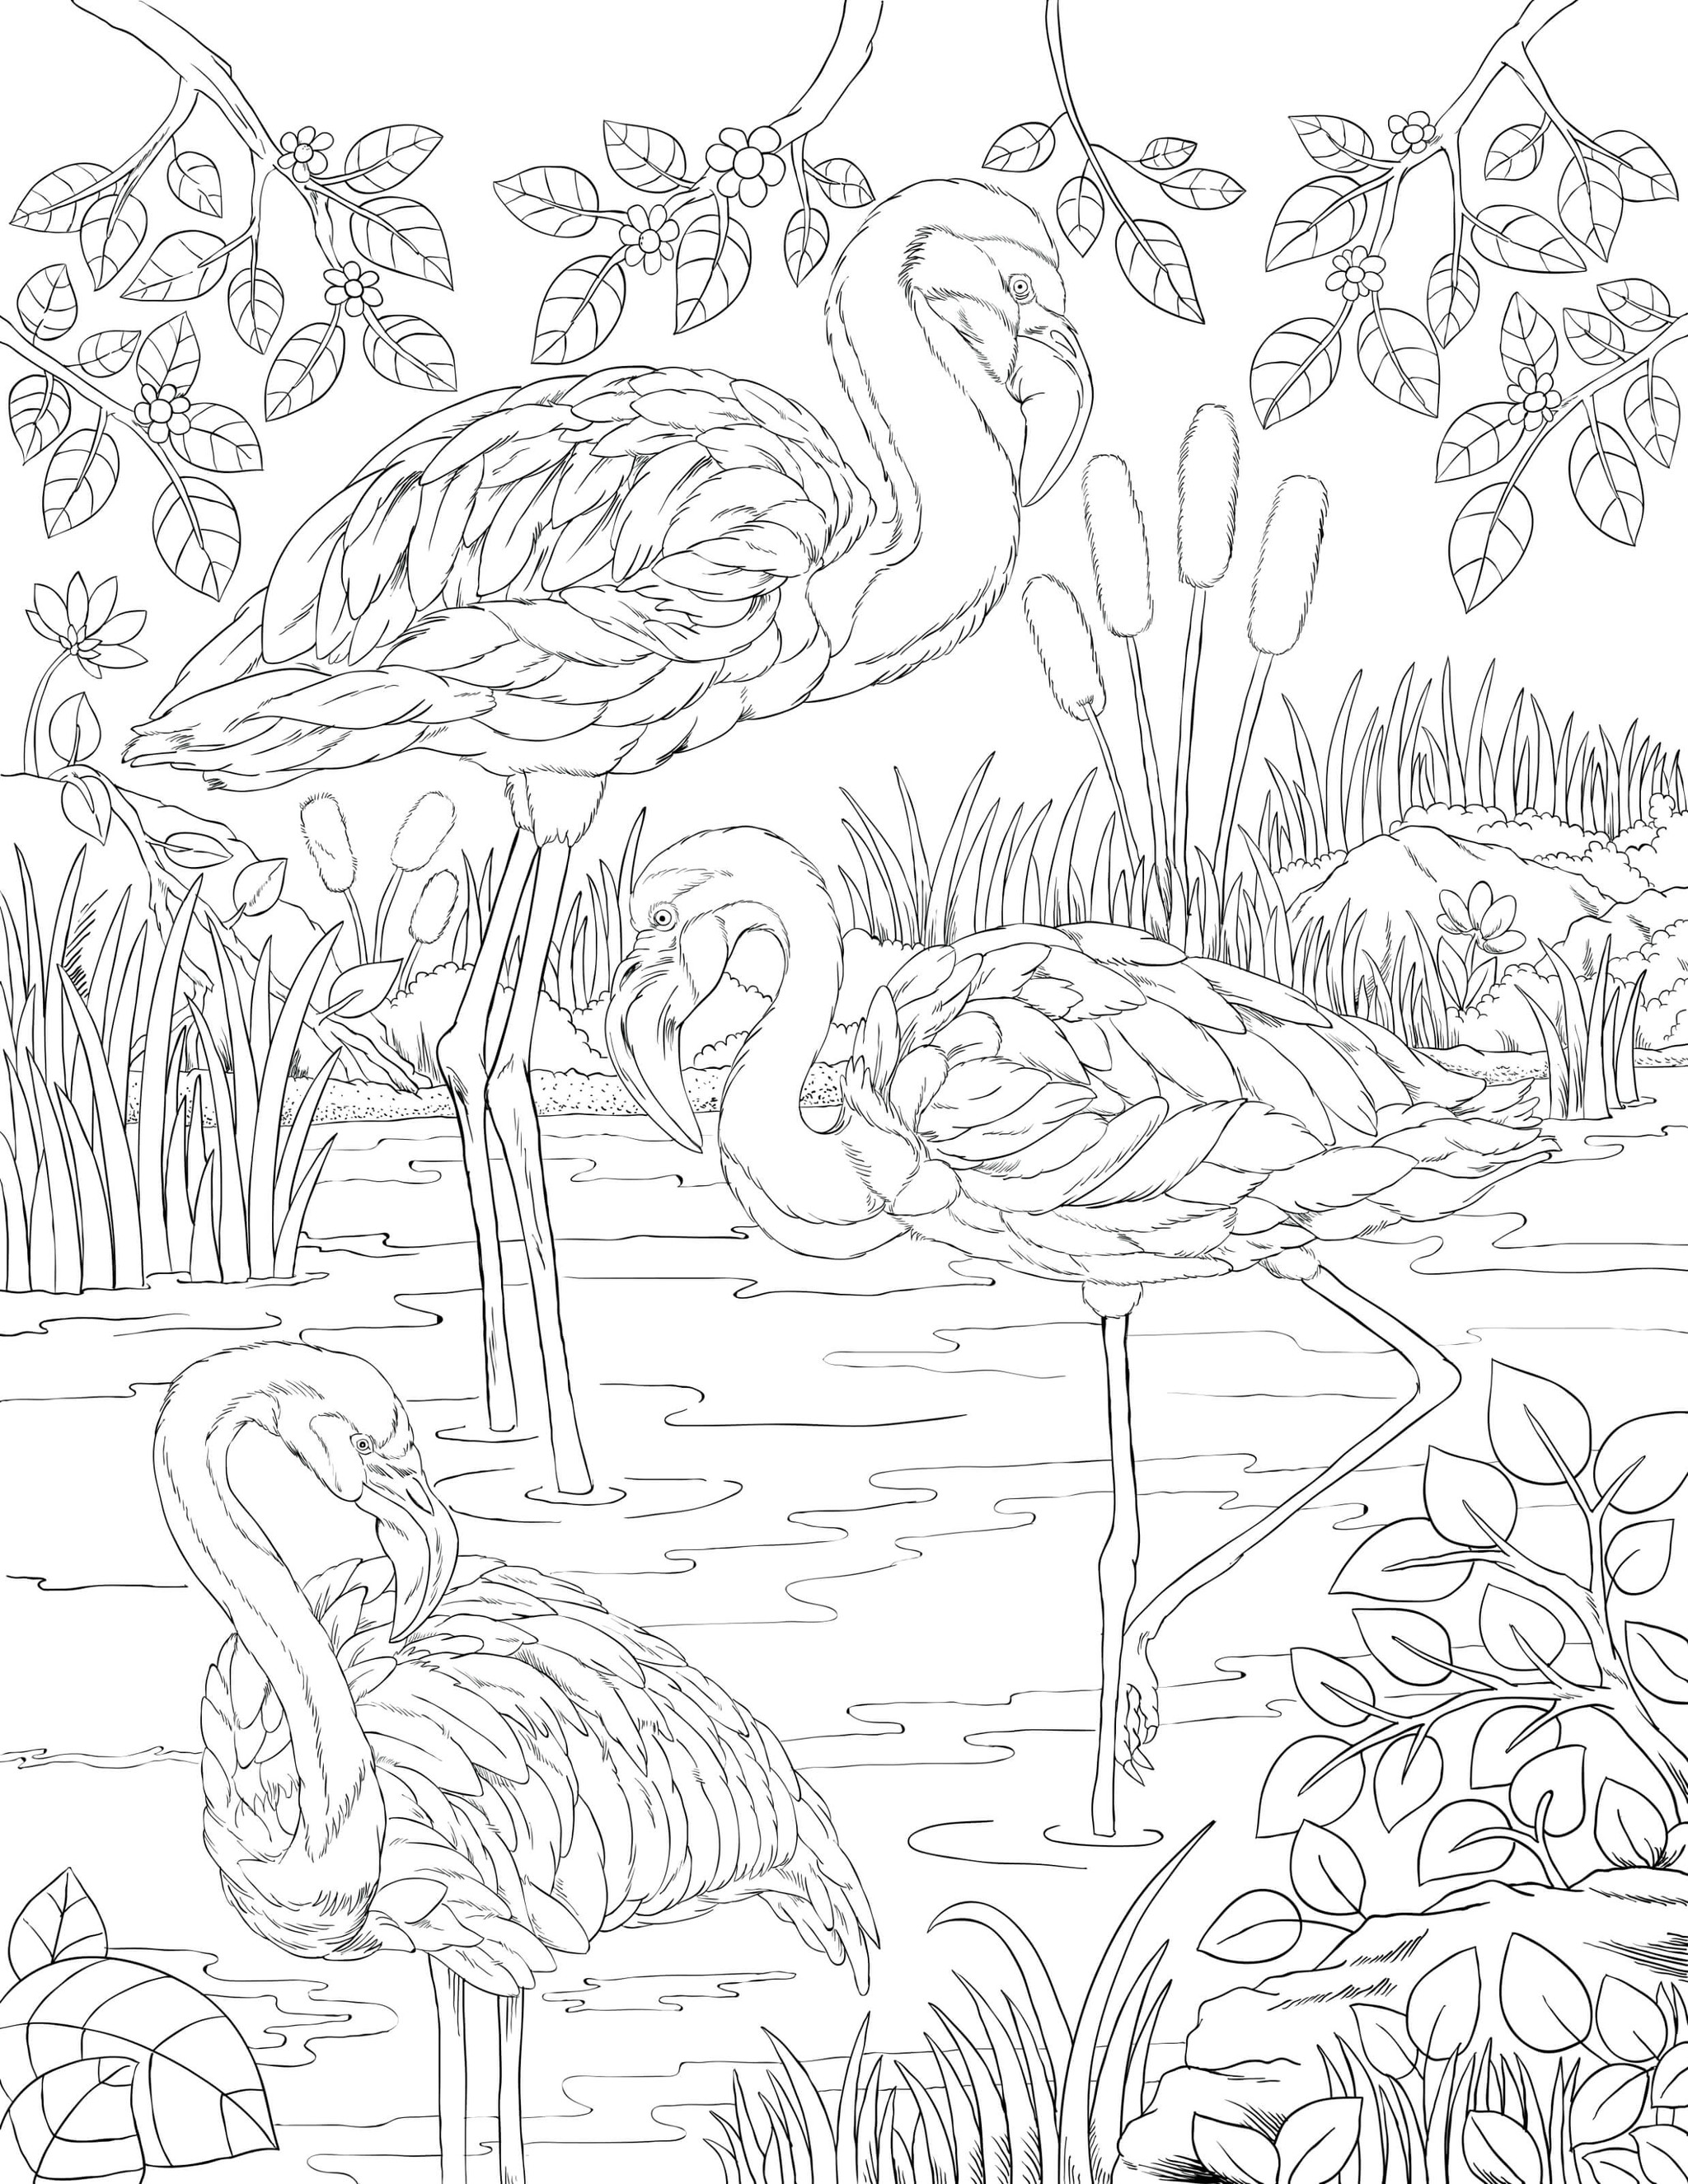 Comprar Flamingo Coloring Book for Adults: Best Adult Coloring